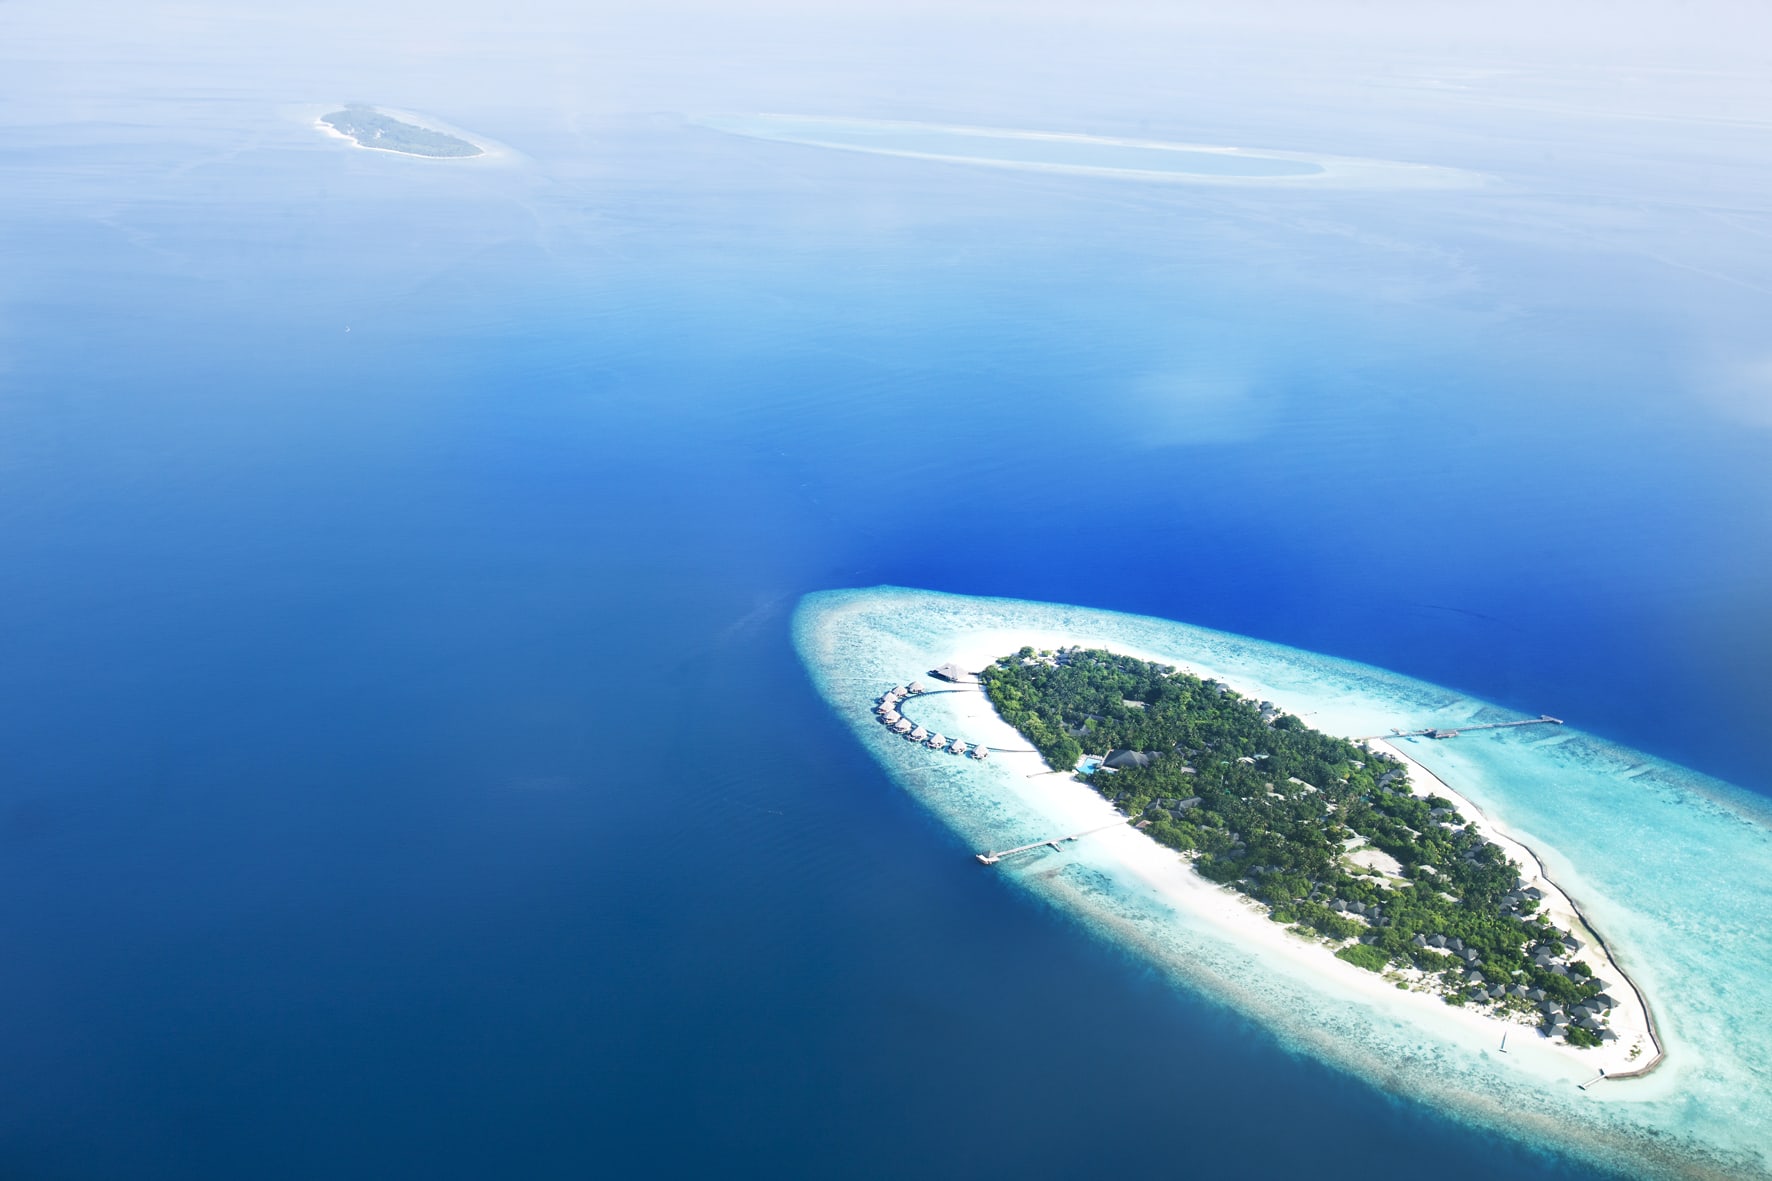 View from above - Private islands in the Maldives